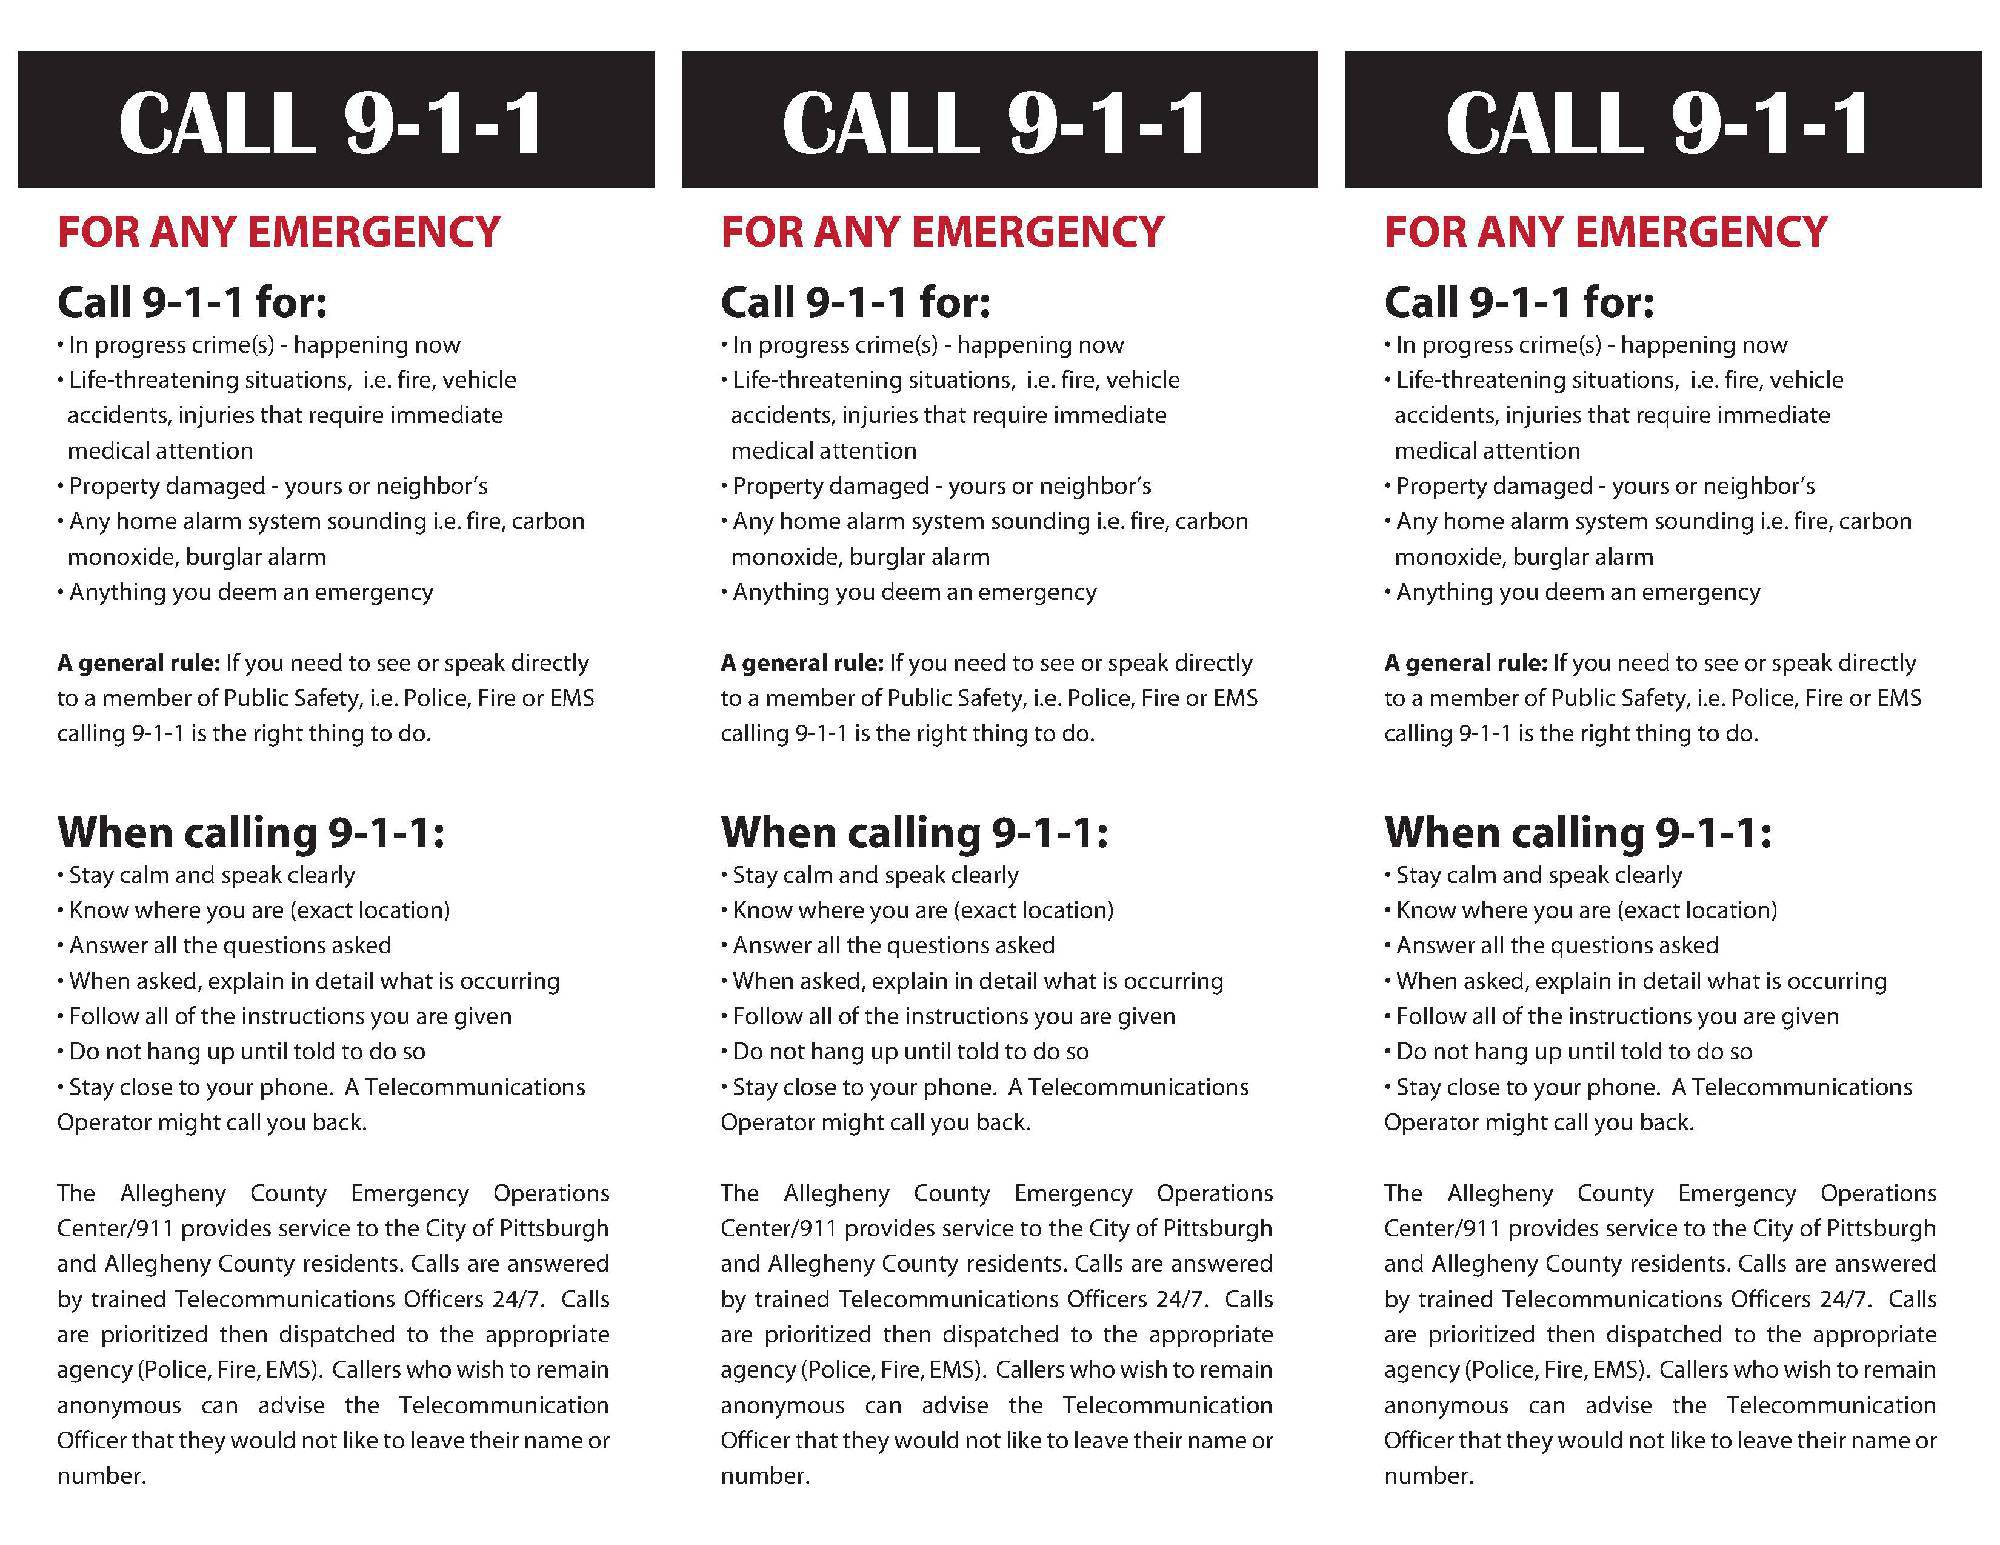 When to call 311 vs. 911